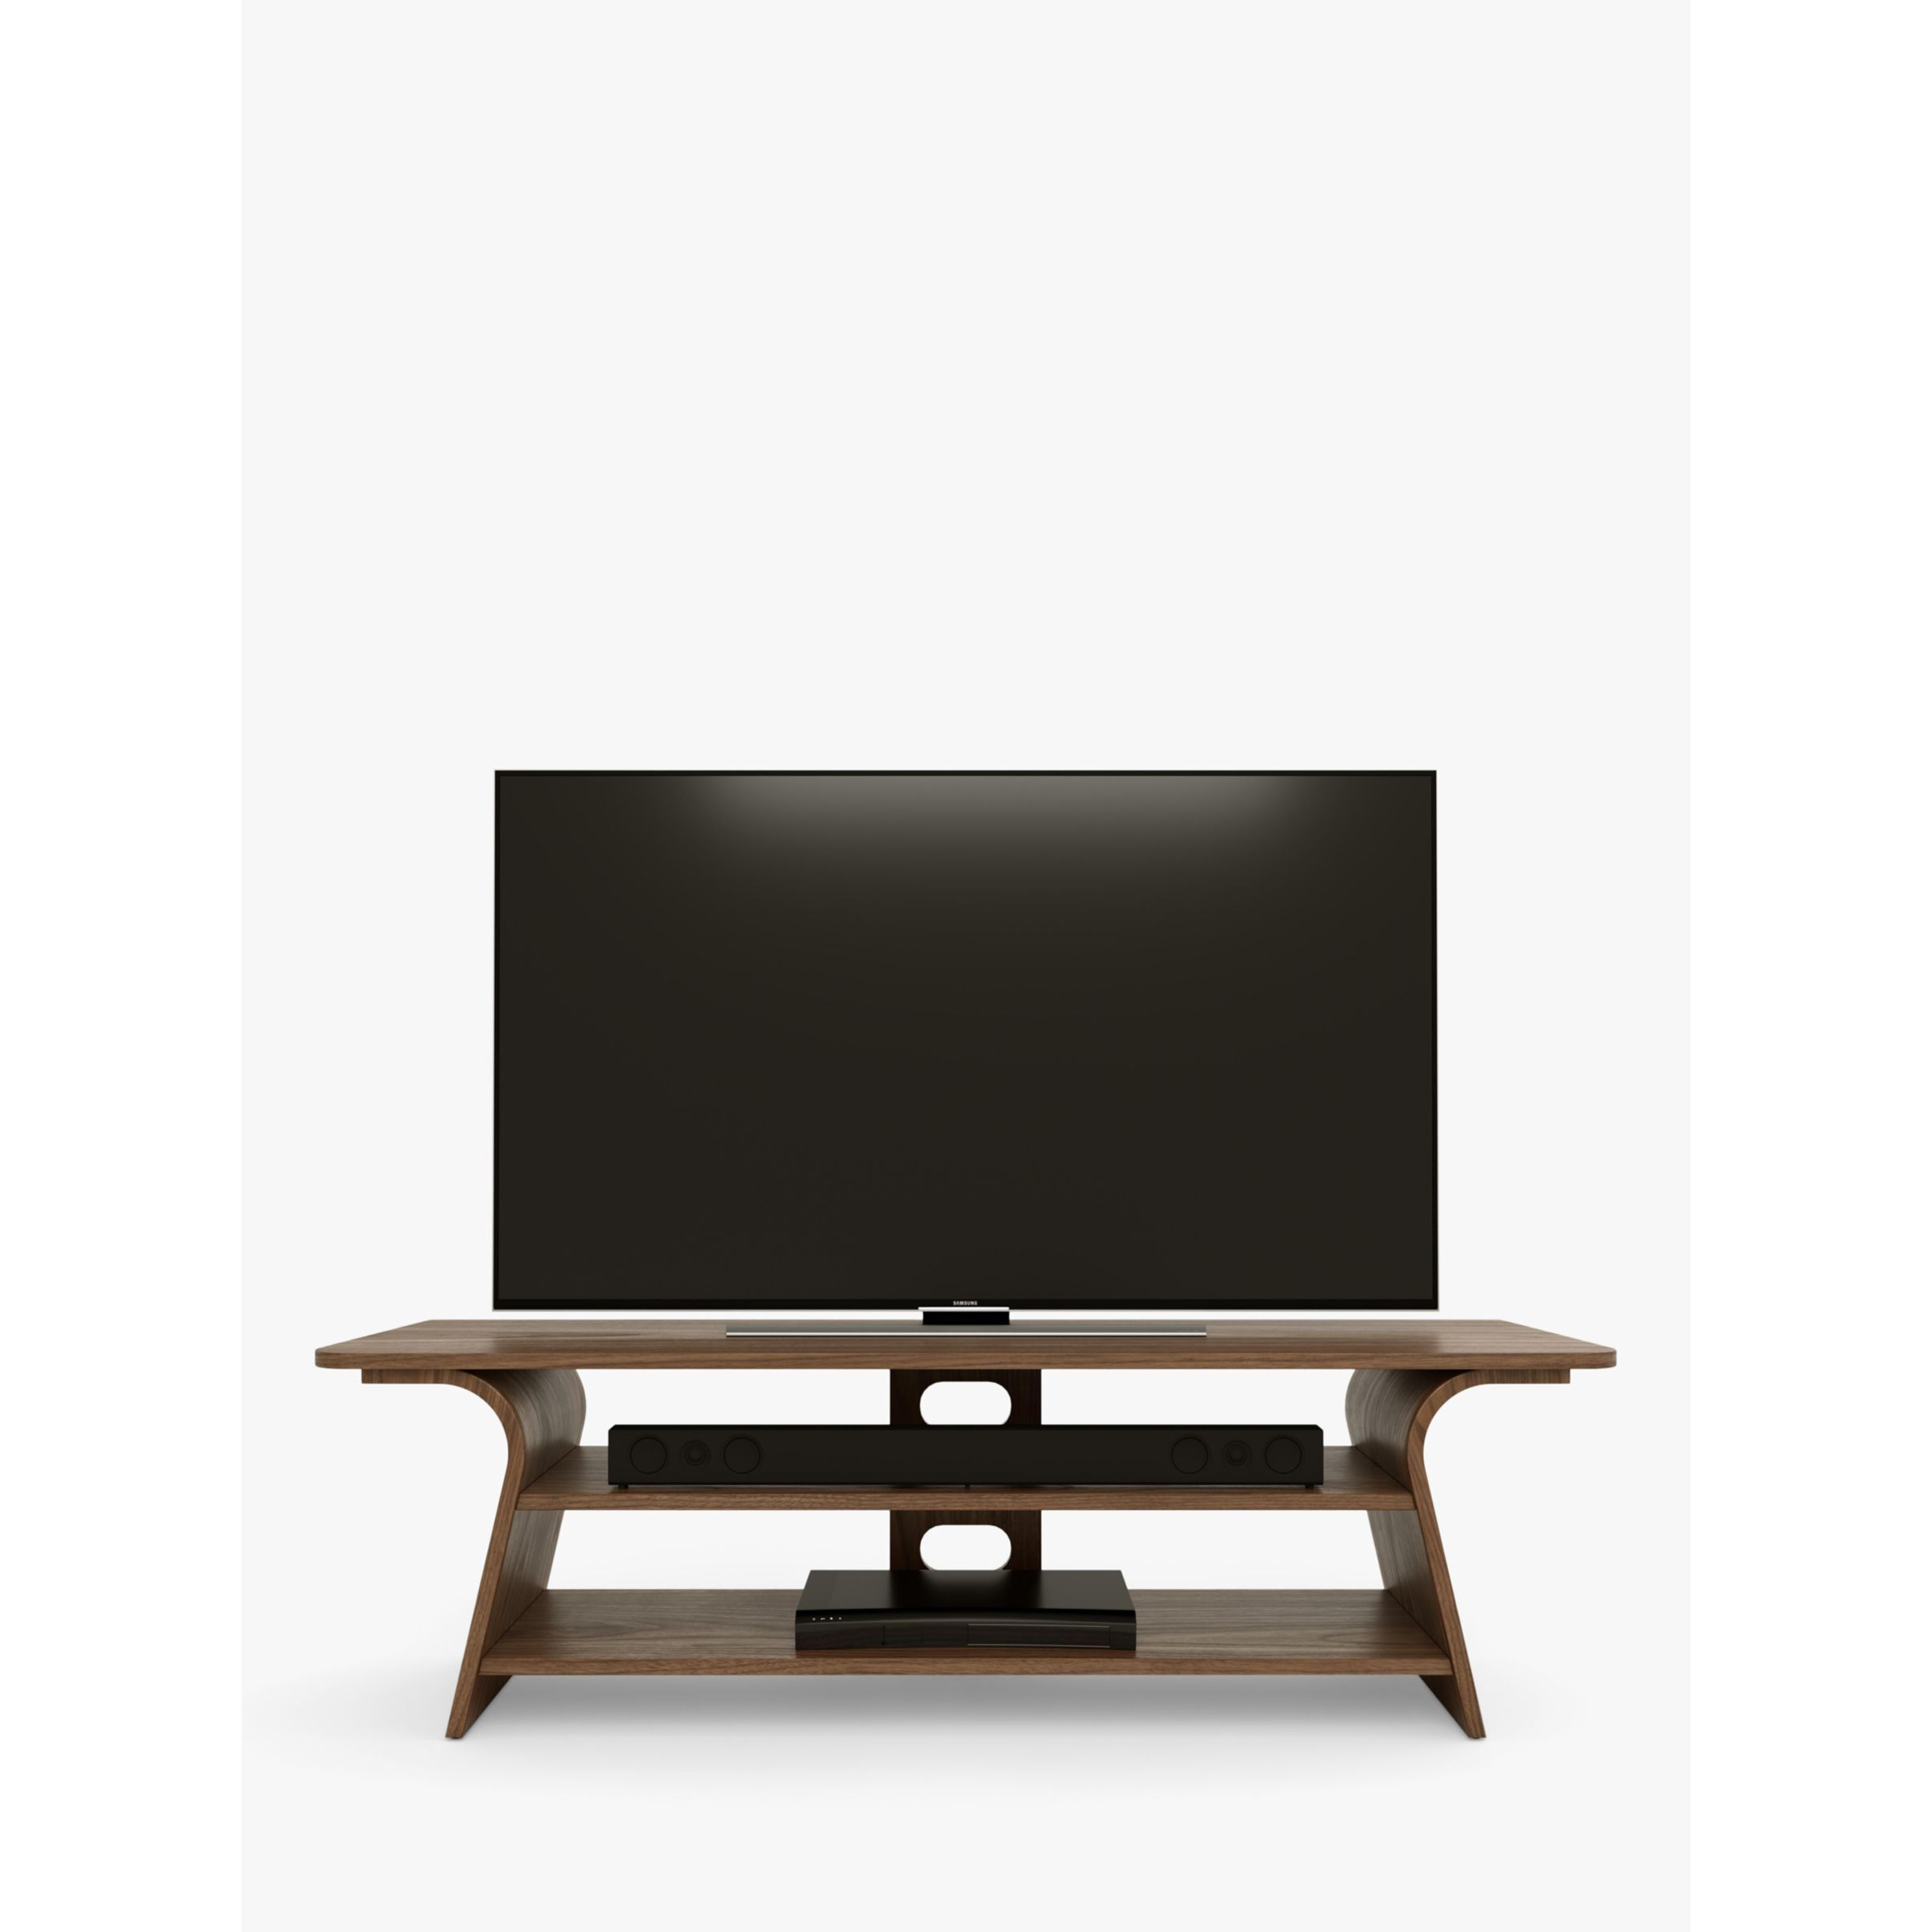 "Tom Schneider Chloe 1500 TV Stand for TVs up to 65""" - image 1